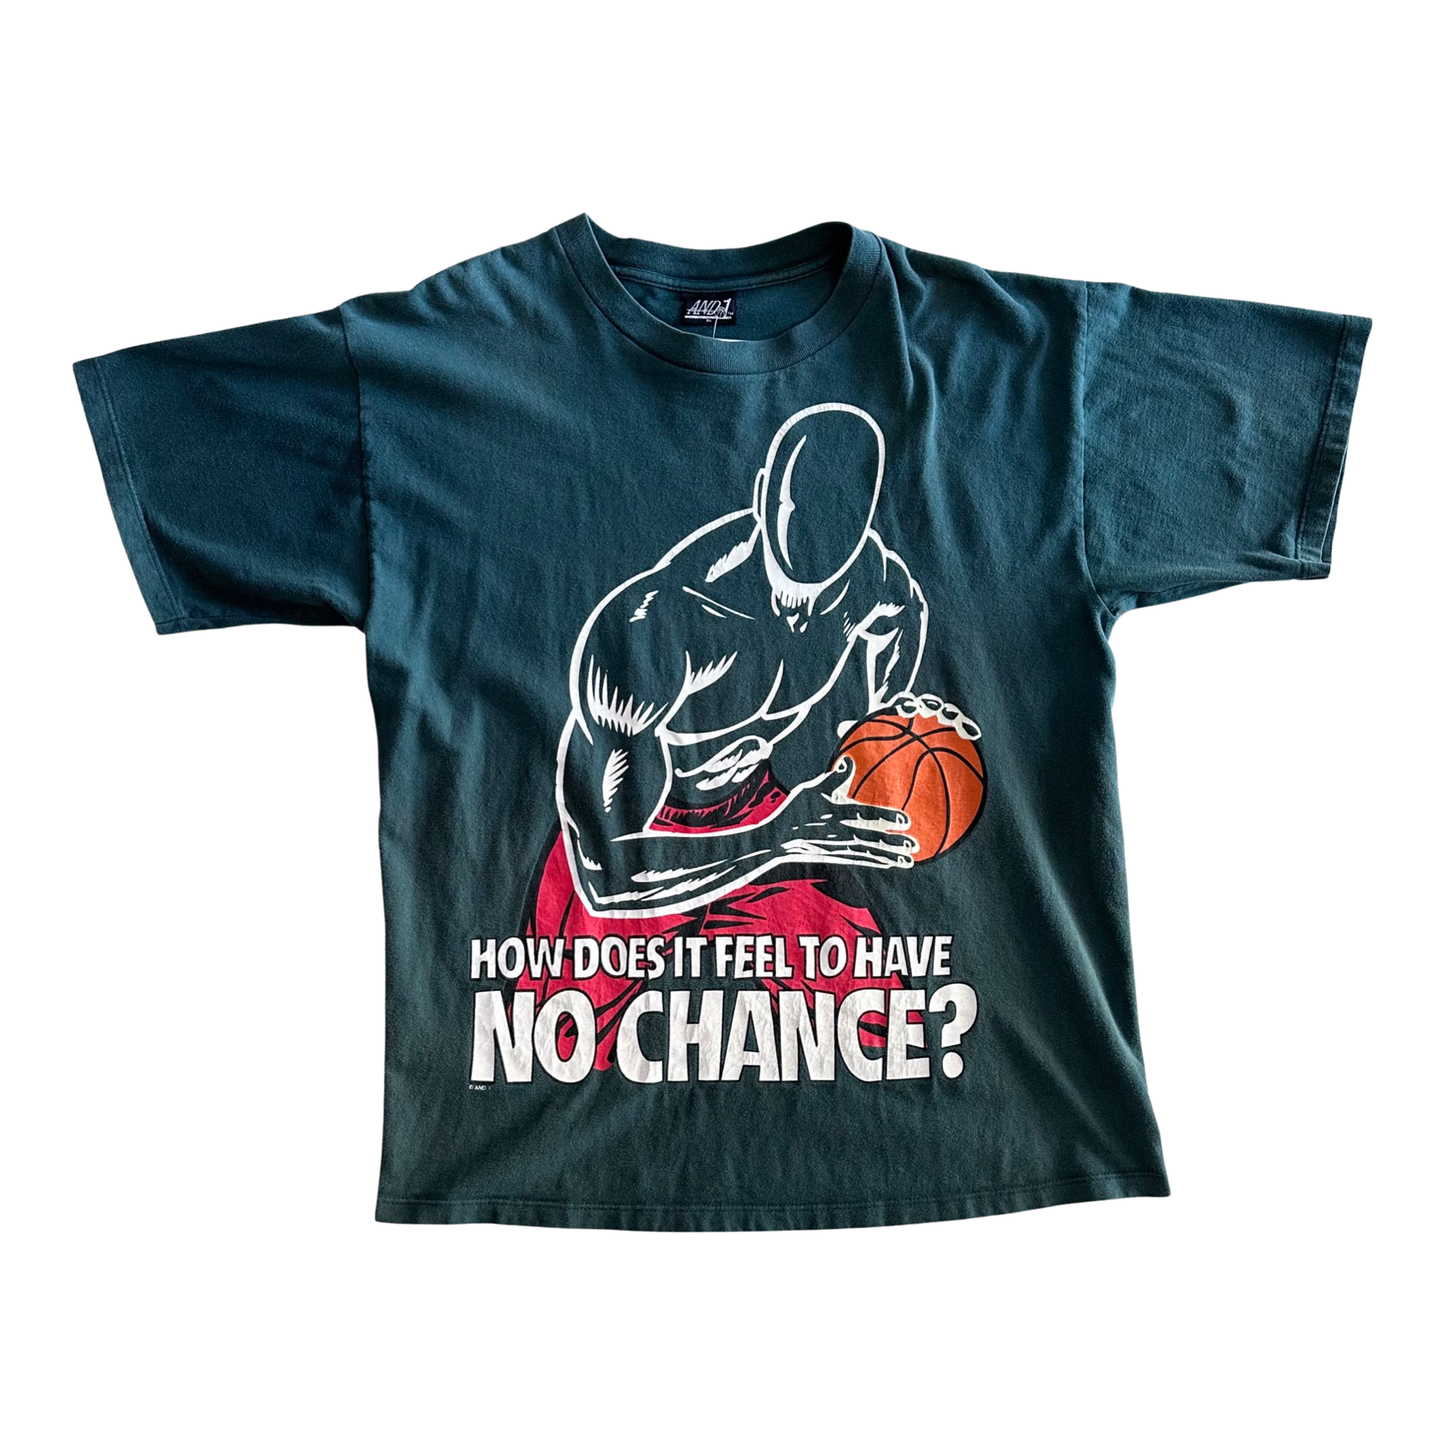 Vintage 90s AND1 “How does it feel to have no chance?” Tee XL